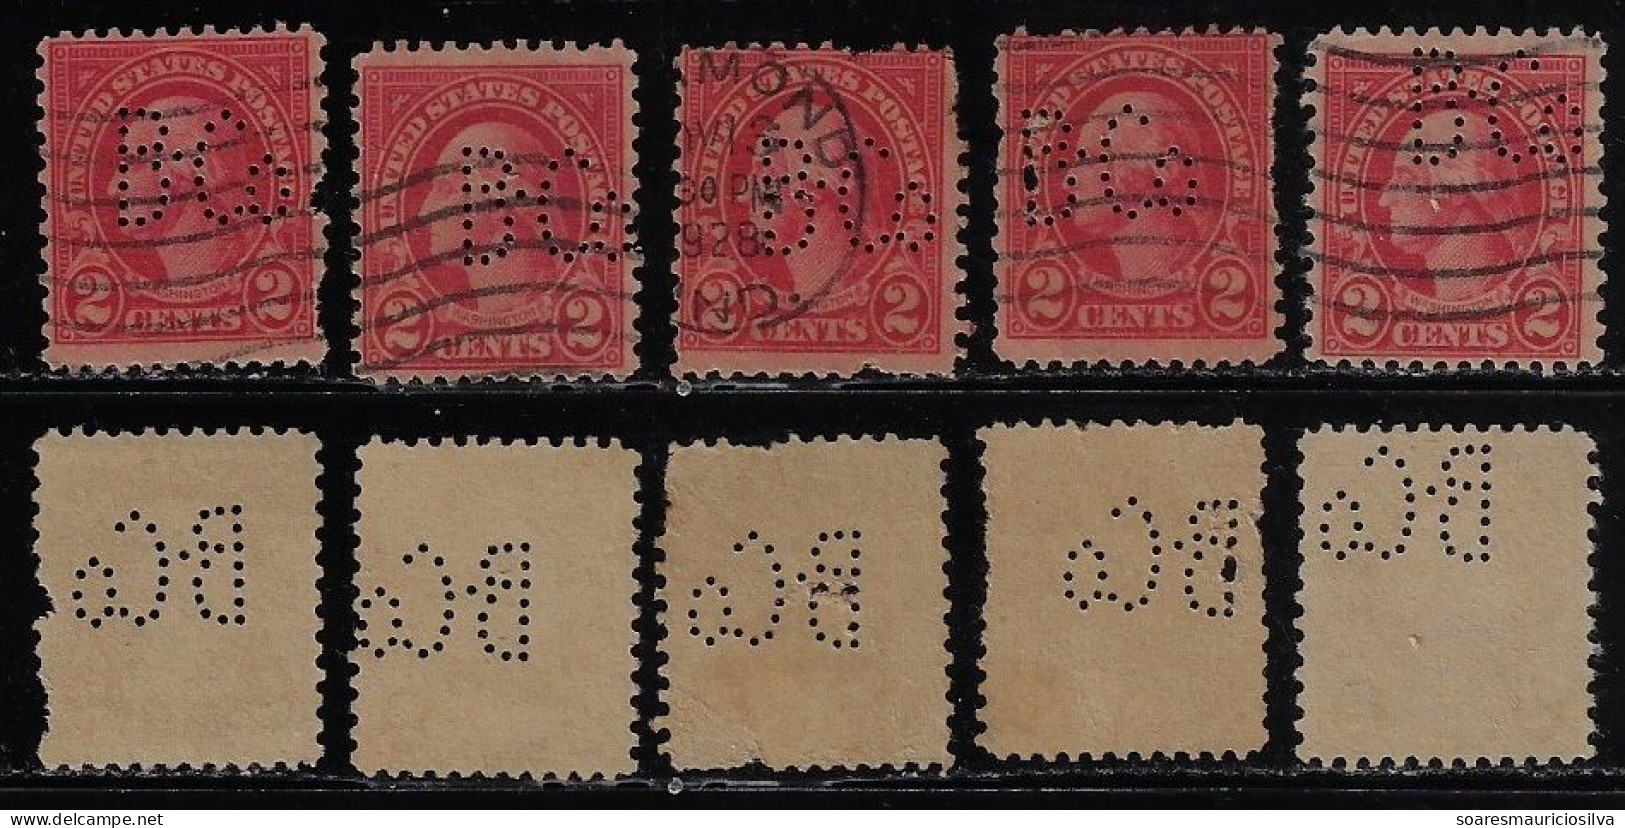 USA United States 1923/1934 5 Stamp With Perfin B.Co By Frank S. Betz Company From Hammond Lochung Perfore - Perfins